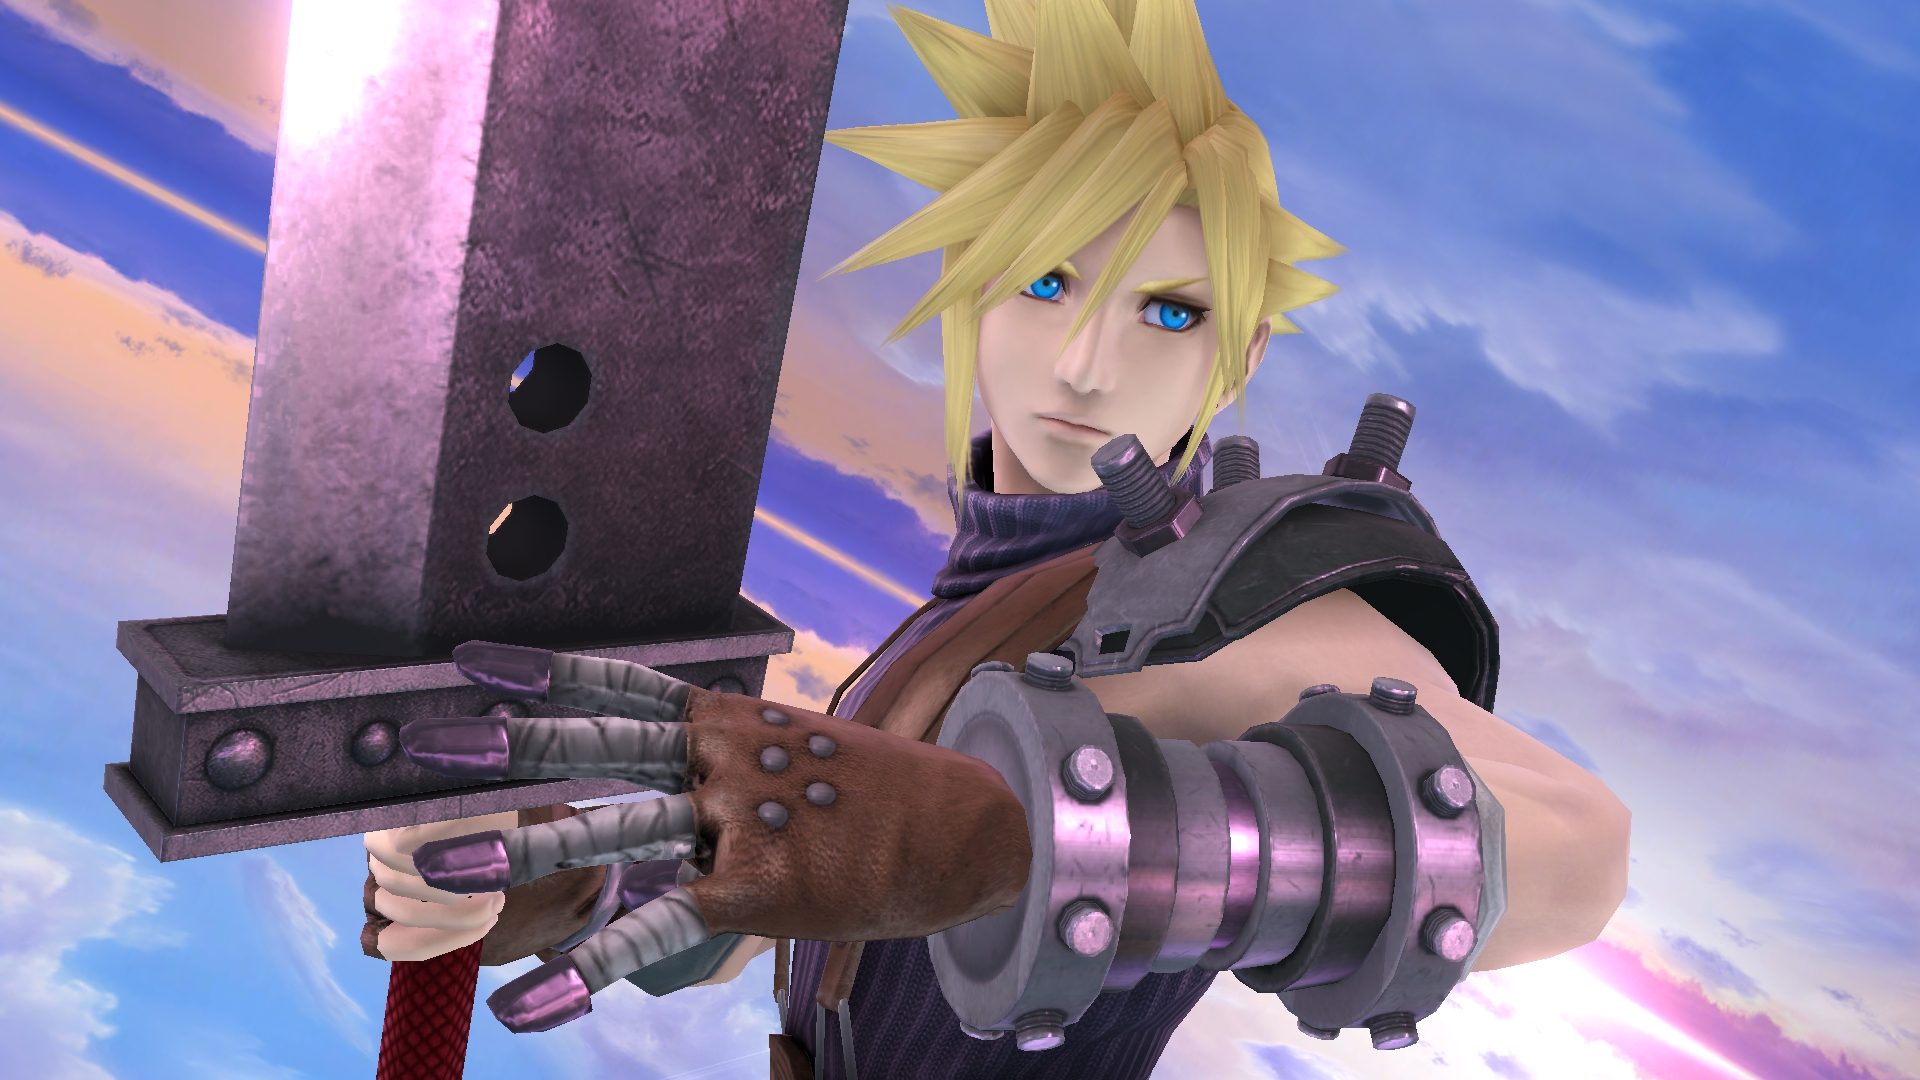 Cloud Strife is Coming to Super Smash Bros.